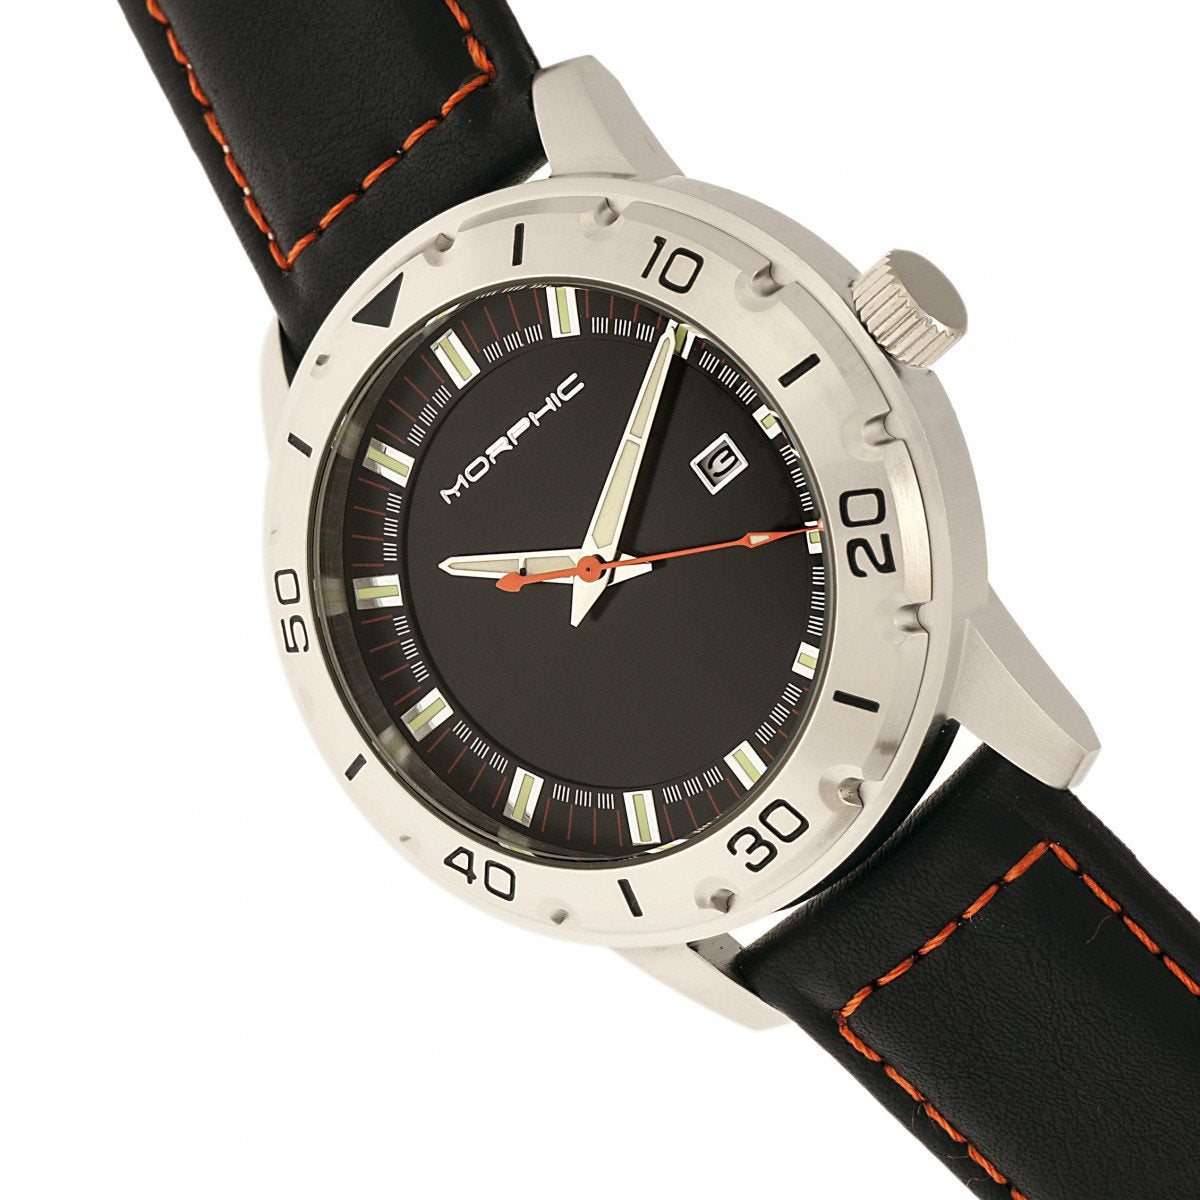 Morphic M71 Series Leather-Band Watch w/Date - Silver/Black - MPH7101